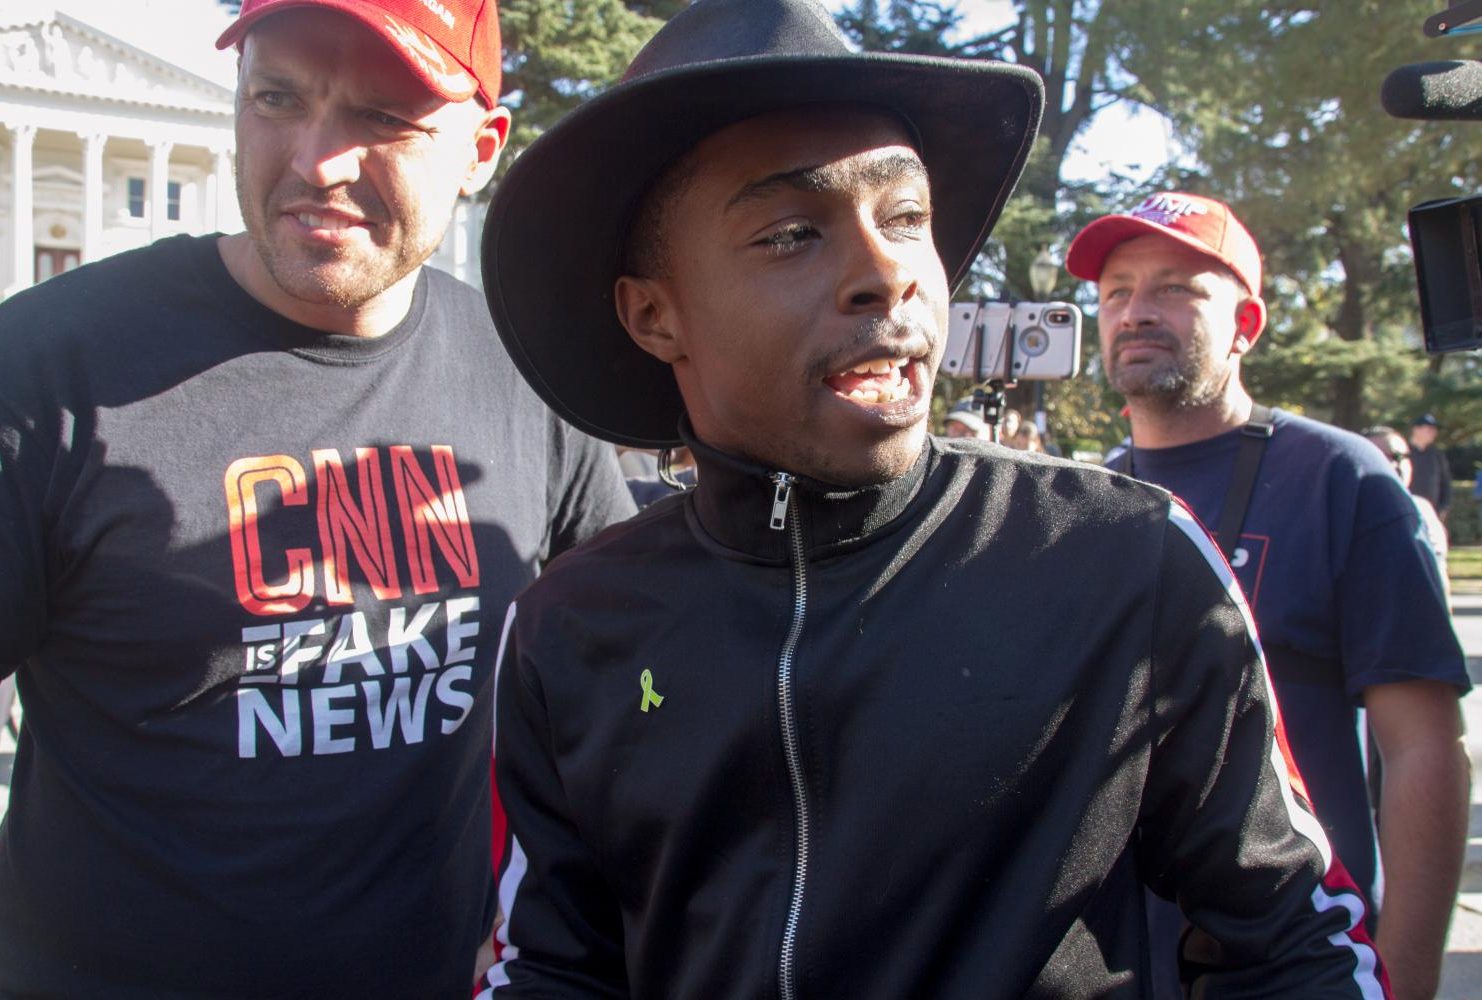 Stevante Clark, who gained notoriety in March 2018 while protesting the shooting of his brother Stephon Clark, speaks to “Turn California Red” conservative rally organizer Ben Bergquam at the California State Capitol on Nov. 4, 2018. (Photo by Patrick Hyun Wilson)